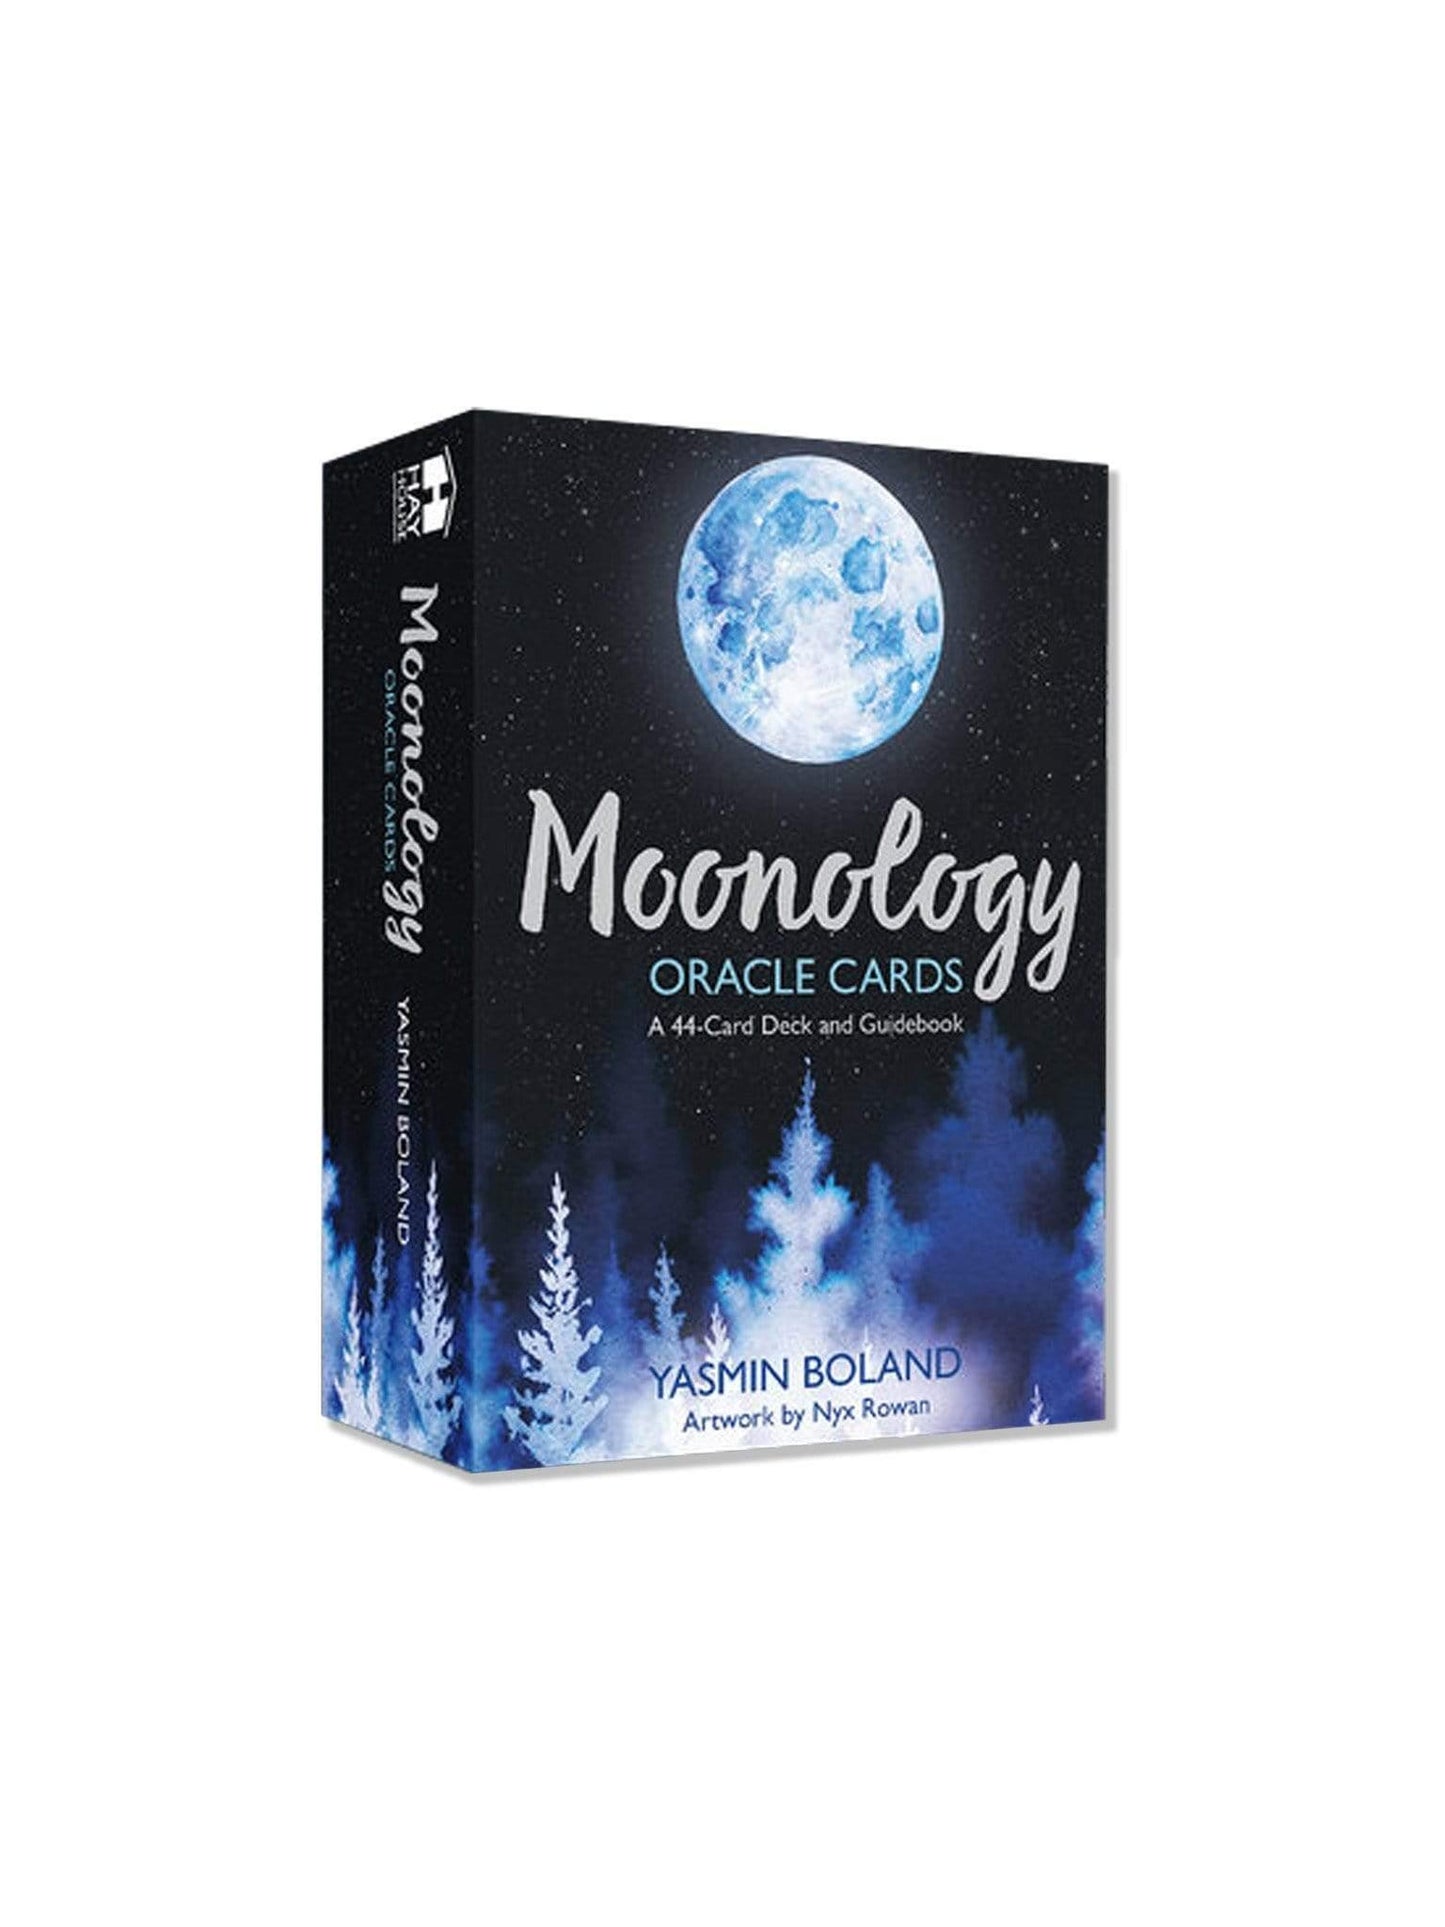 Moonology Oracle Deck Books